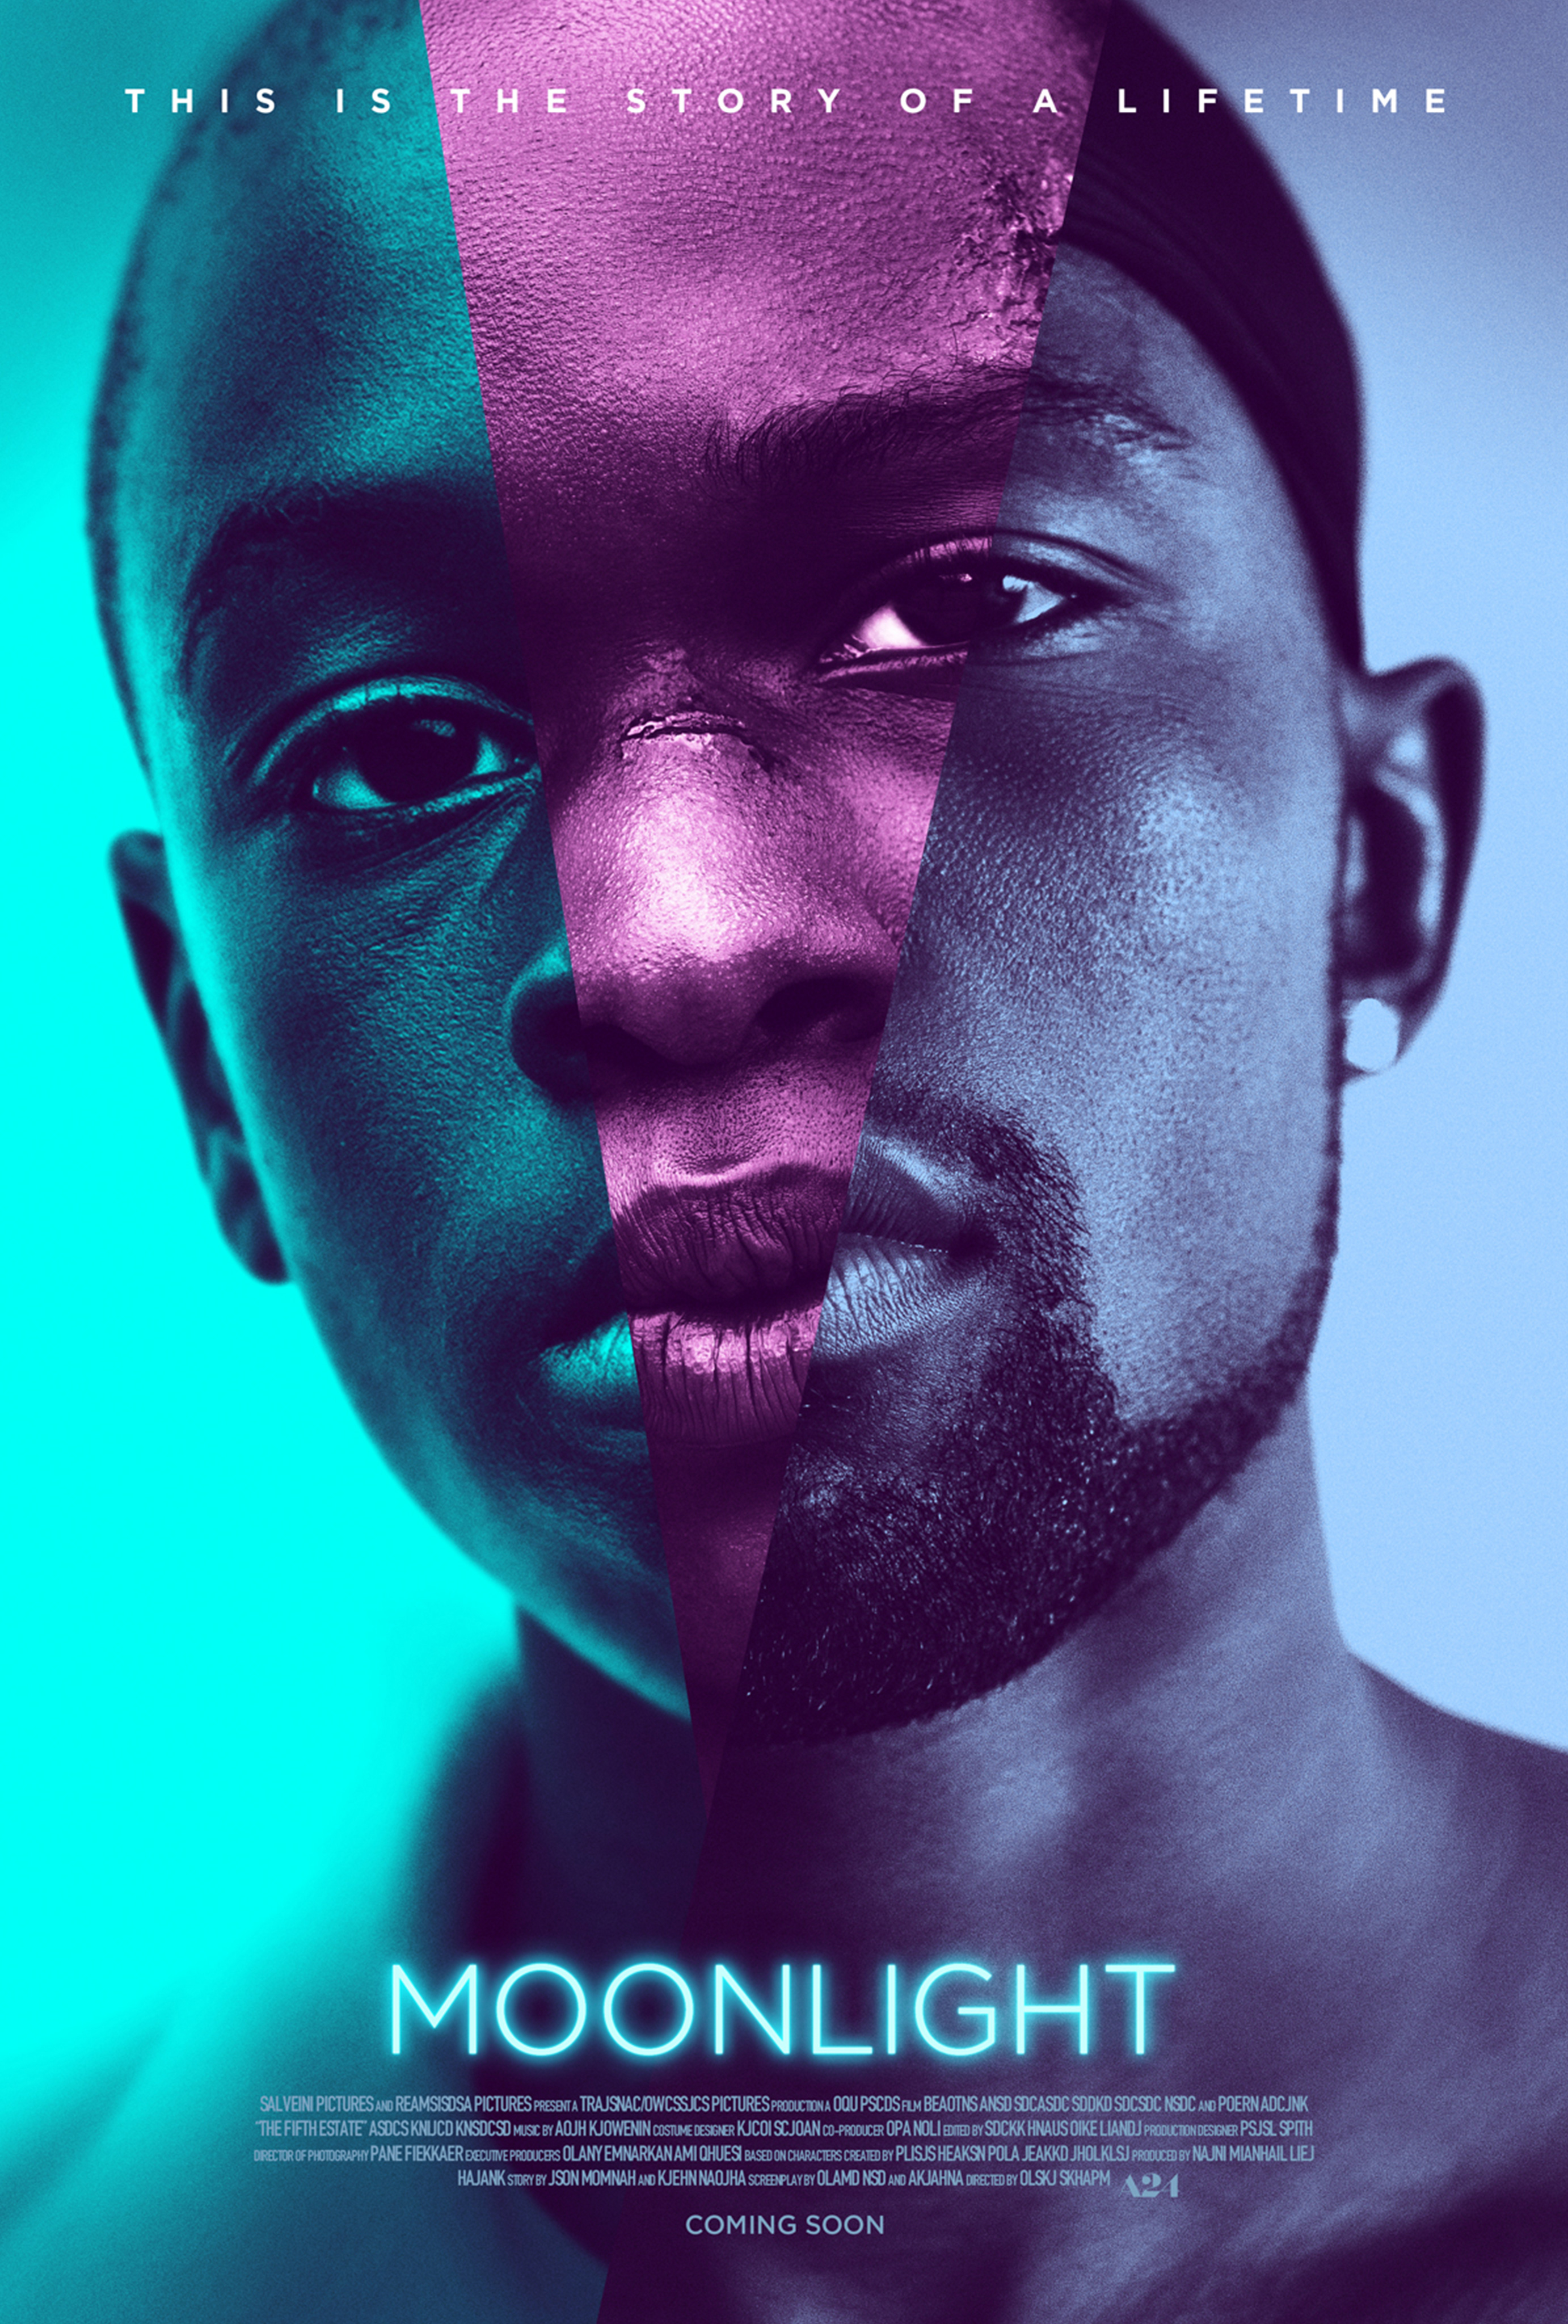 Poster for film Moonlight, Black mans face with colorful triangles across it